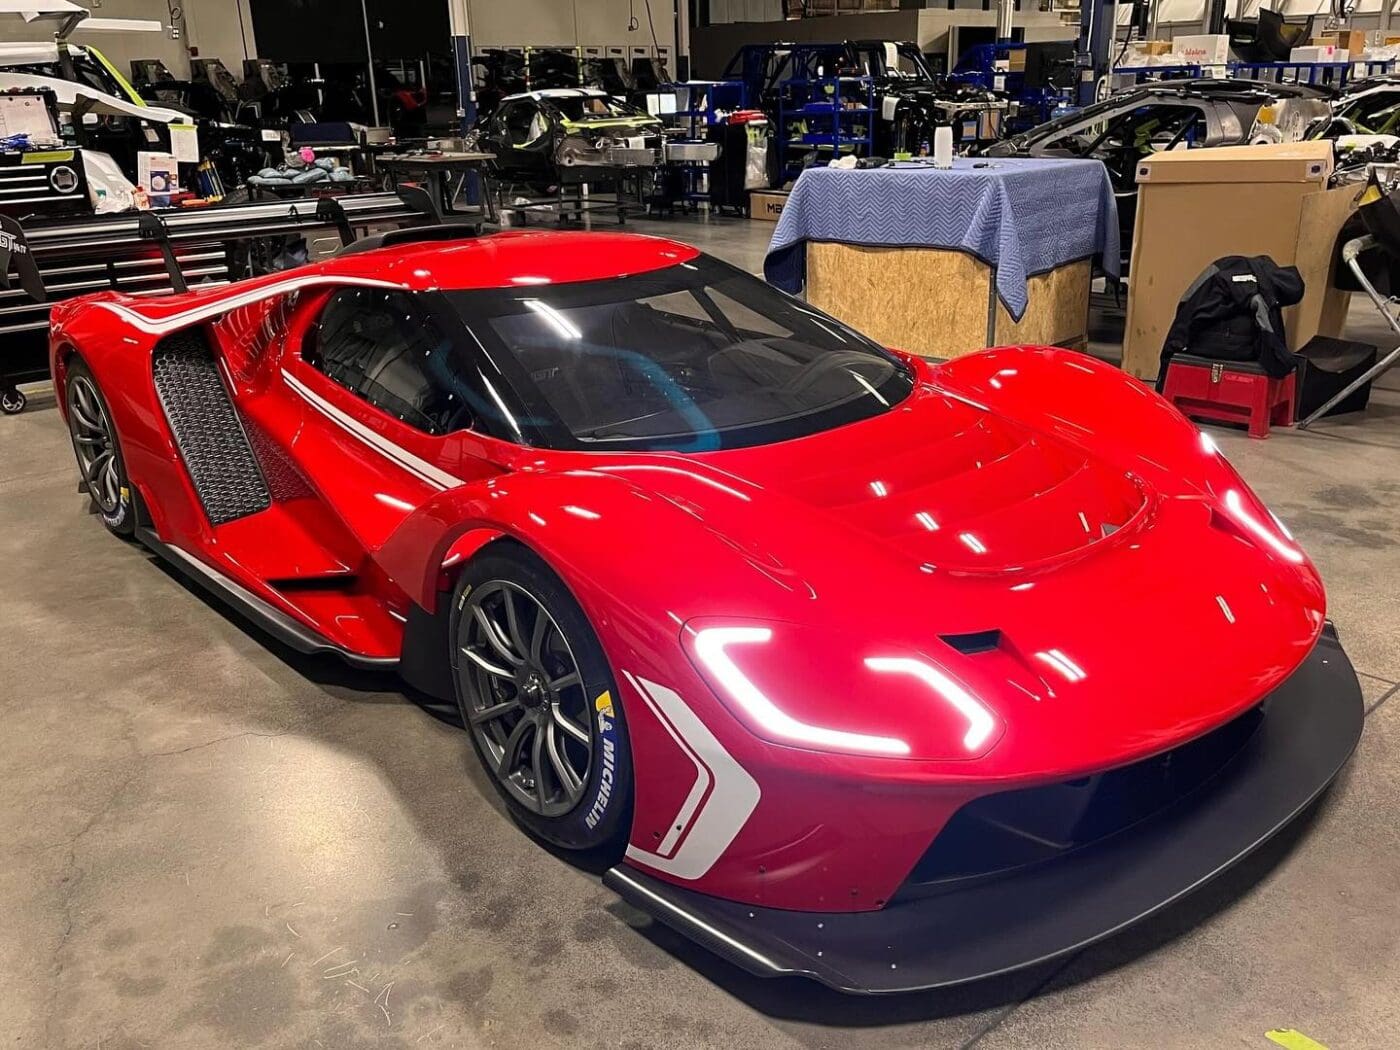 Hennessey Performance Gets A Sneak Peek At The Upcoming MK IV Ford GT